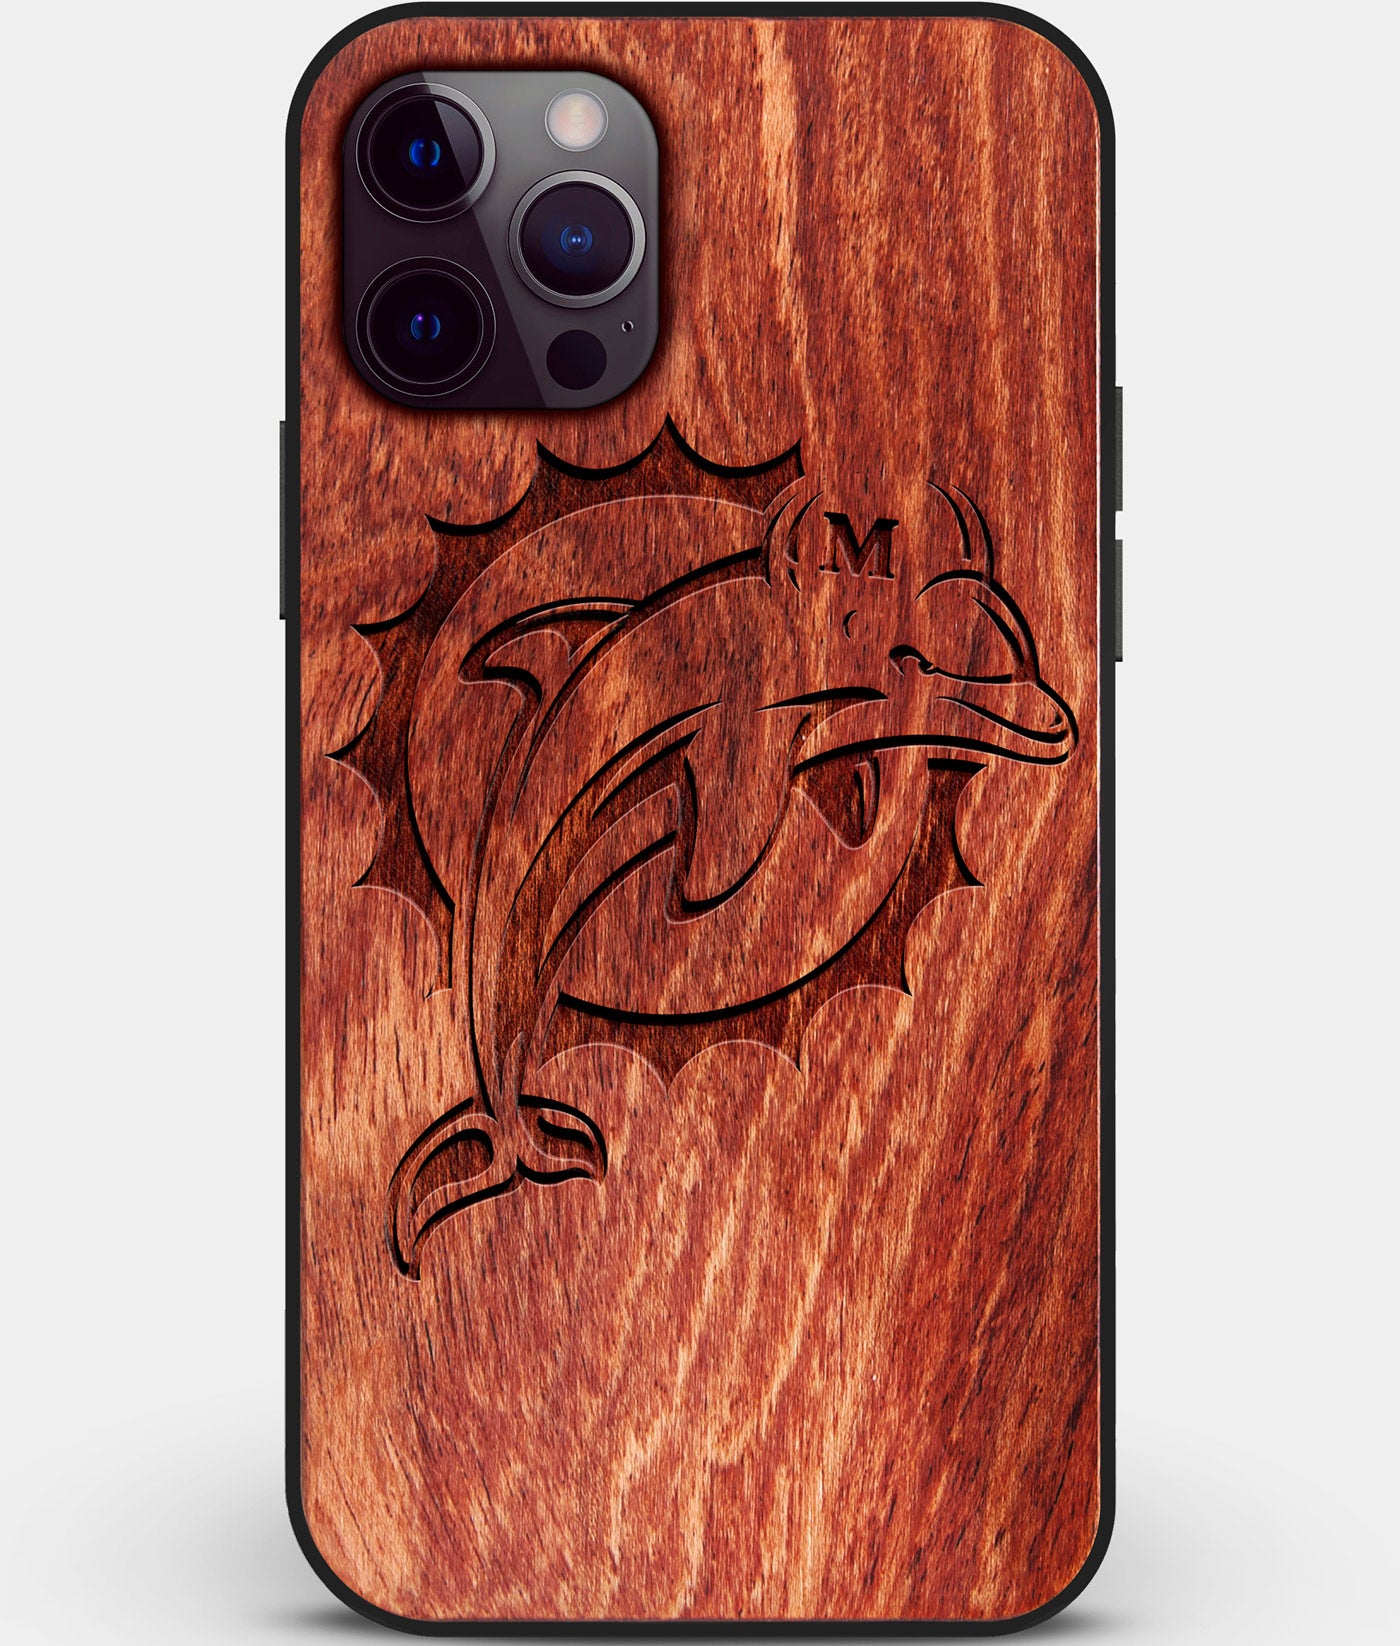 Custom Carved Wood Miami Dolphins iPhone 12 Pro Case | Personalized Mahogany Wood Miami Dolphins Cover, Birthday Gift, Gifts For Him, Monogrammed Gift For Fan | by Engraved In Nature